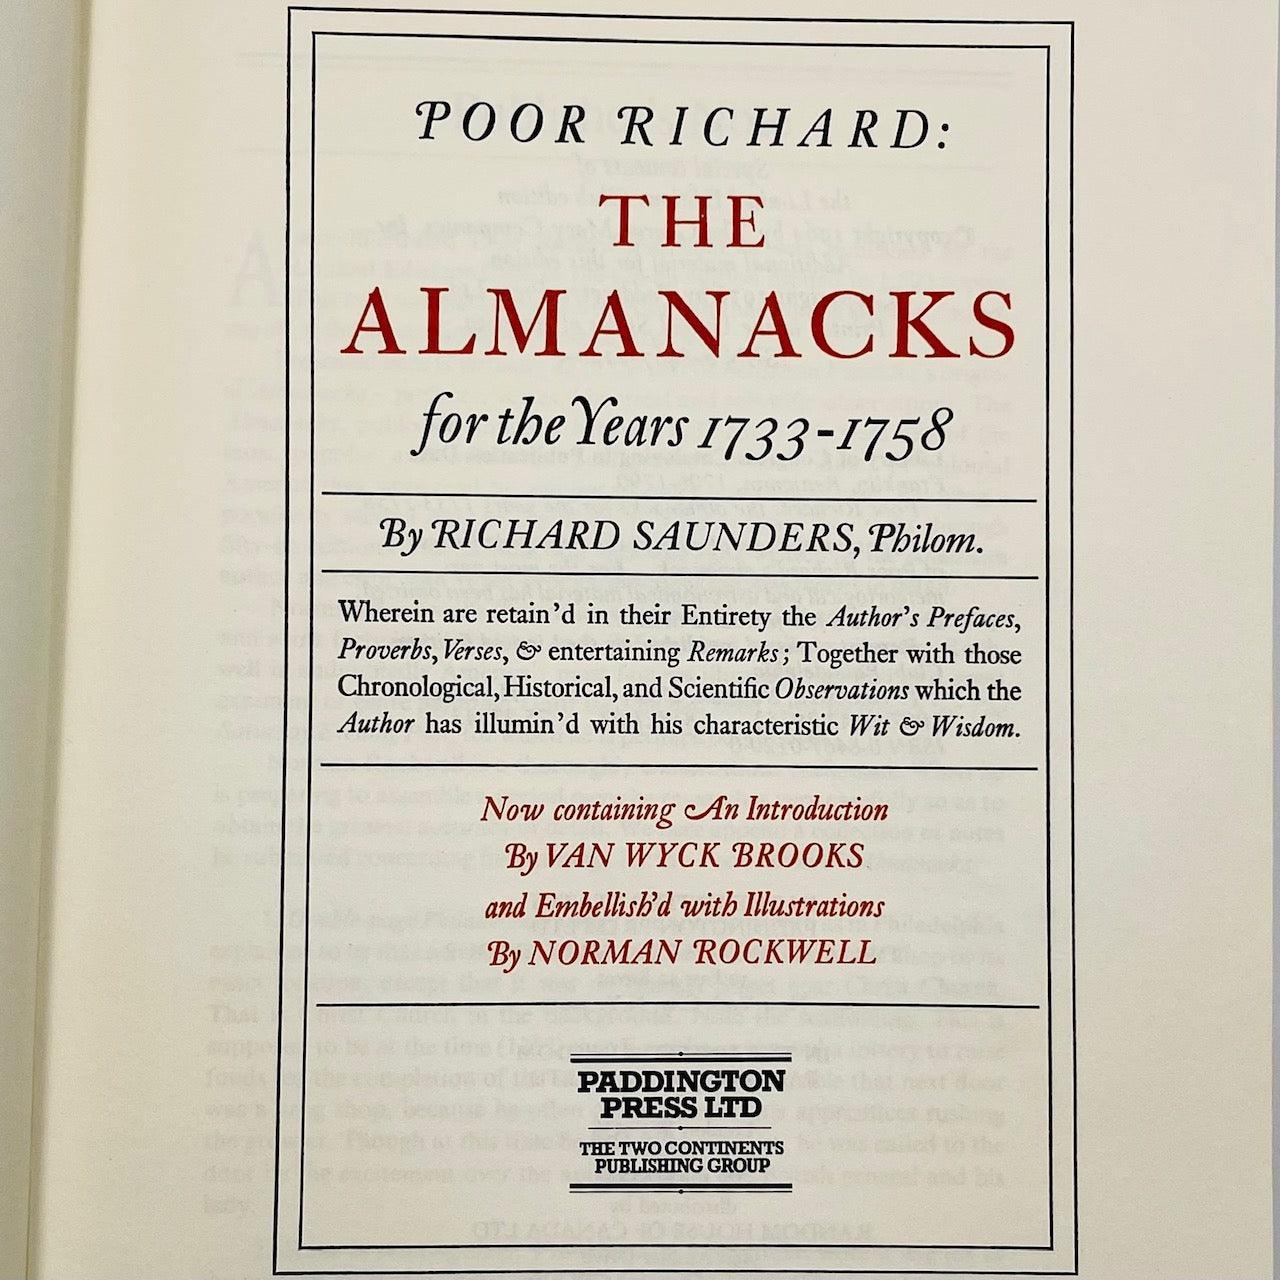 Benjamin Franklin's Poor Richard's Almanacks for the Years 1733 to 1758 (Illustrated by Norman Rockwell) - Grinning Cat Books - AMERICANA - 